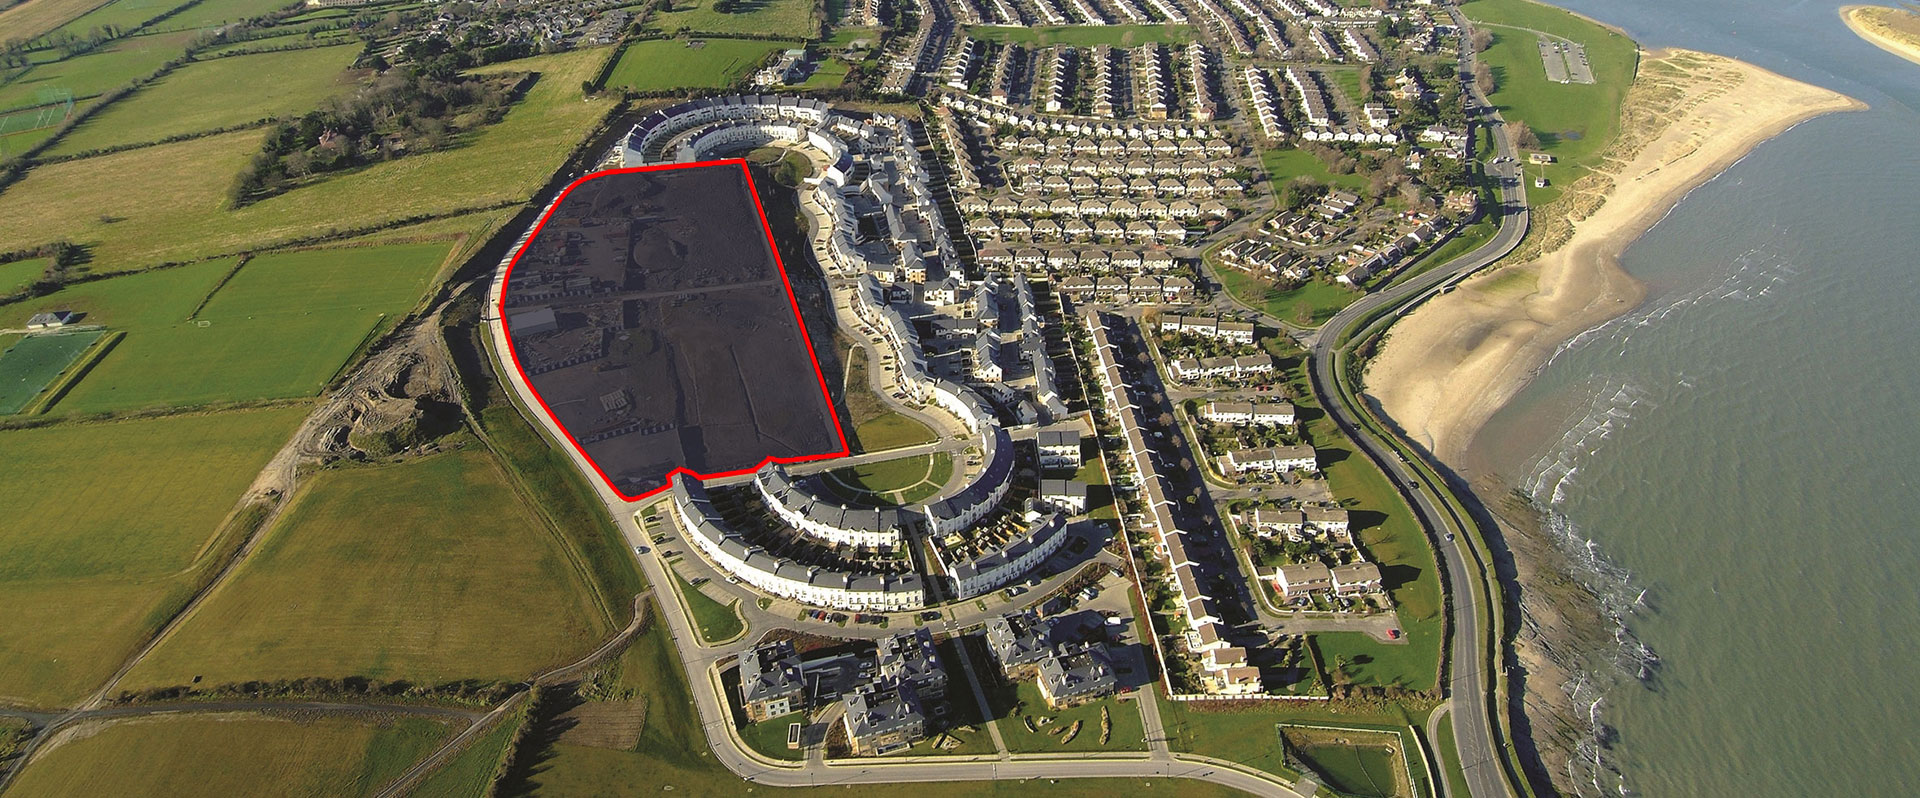 Castlebrowne's Project - Robswall Site Development